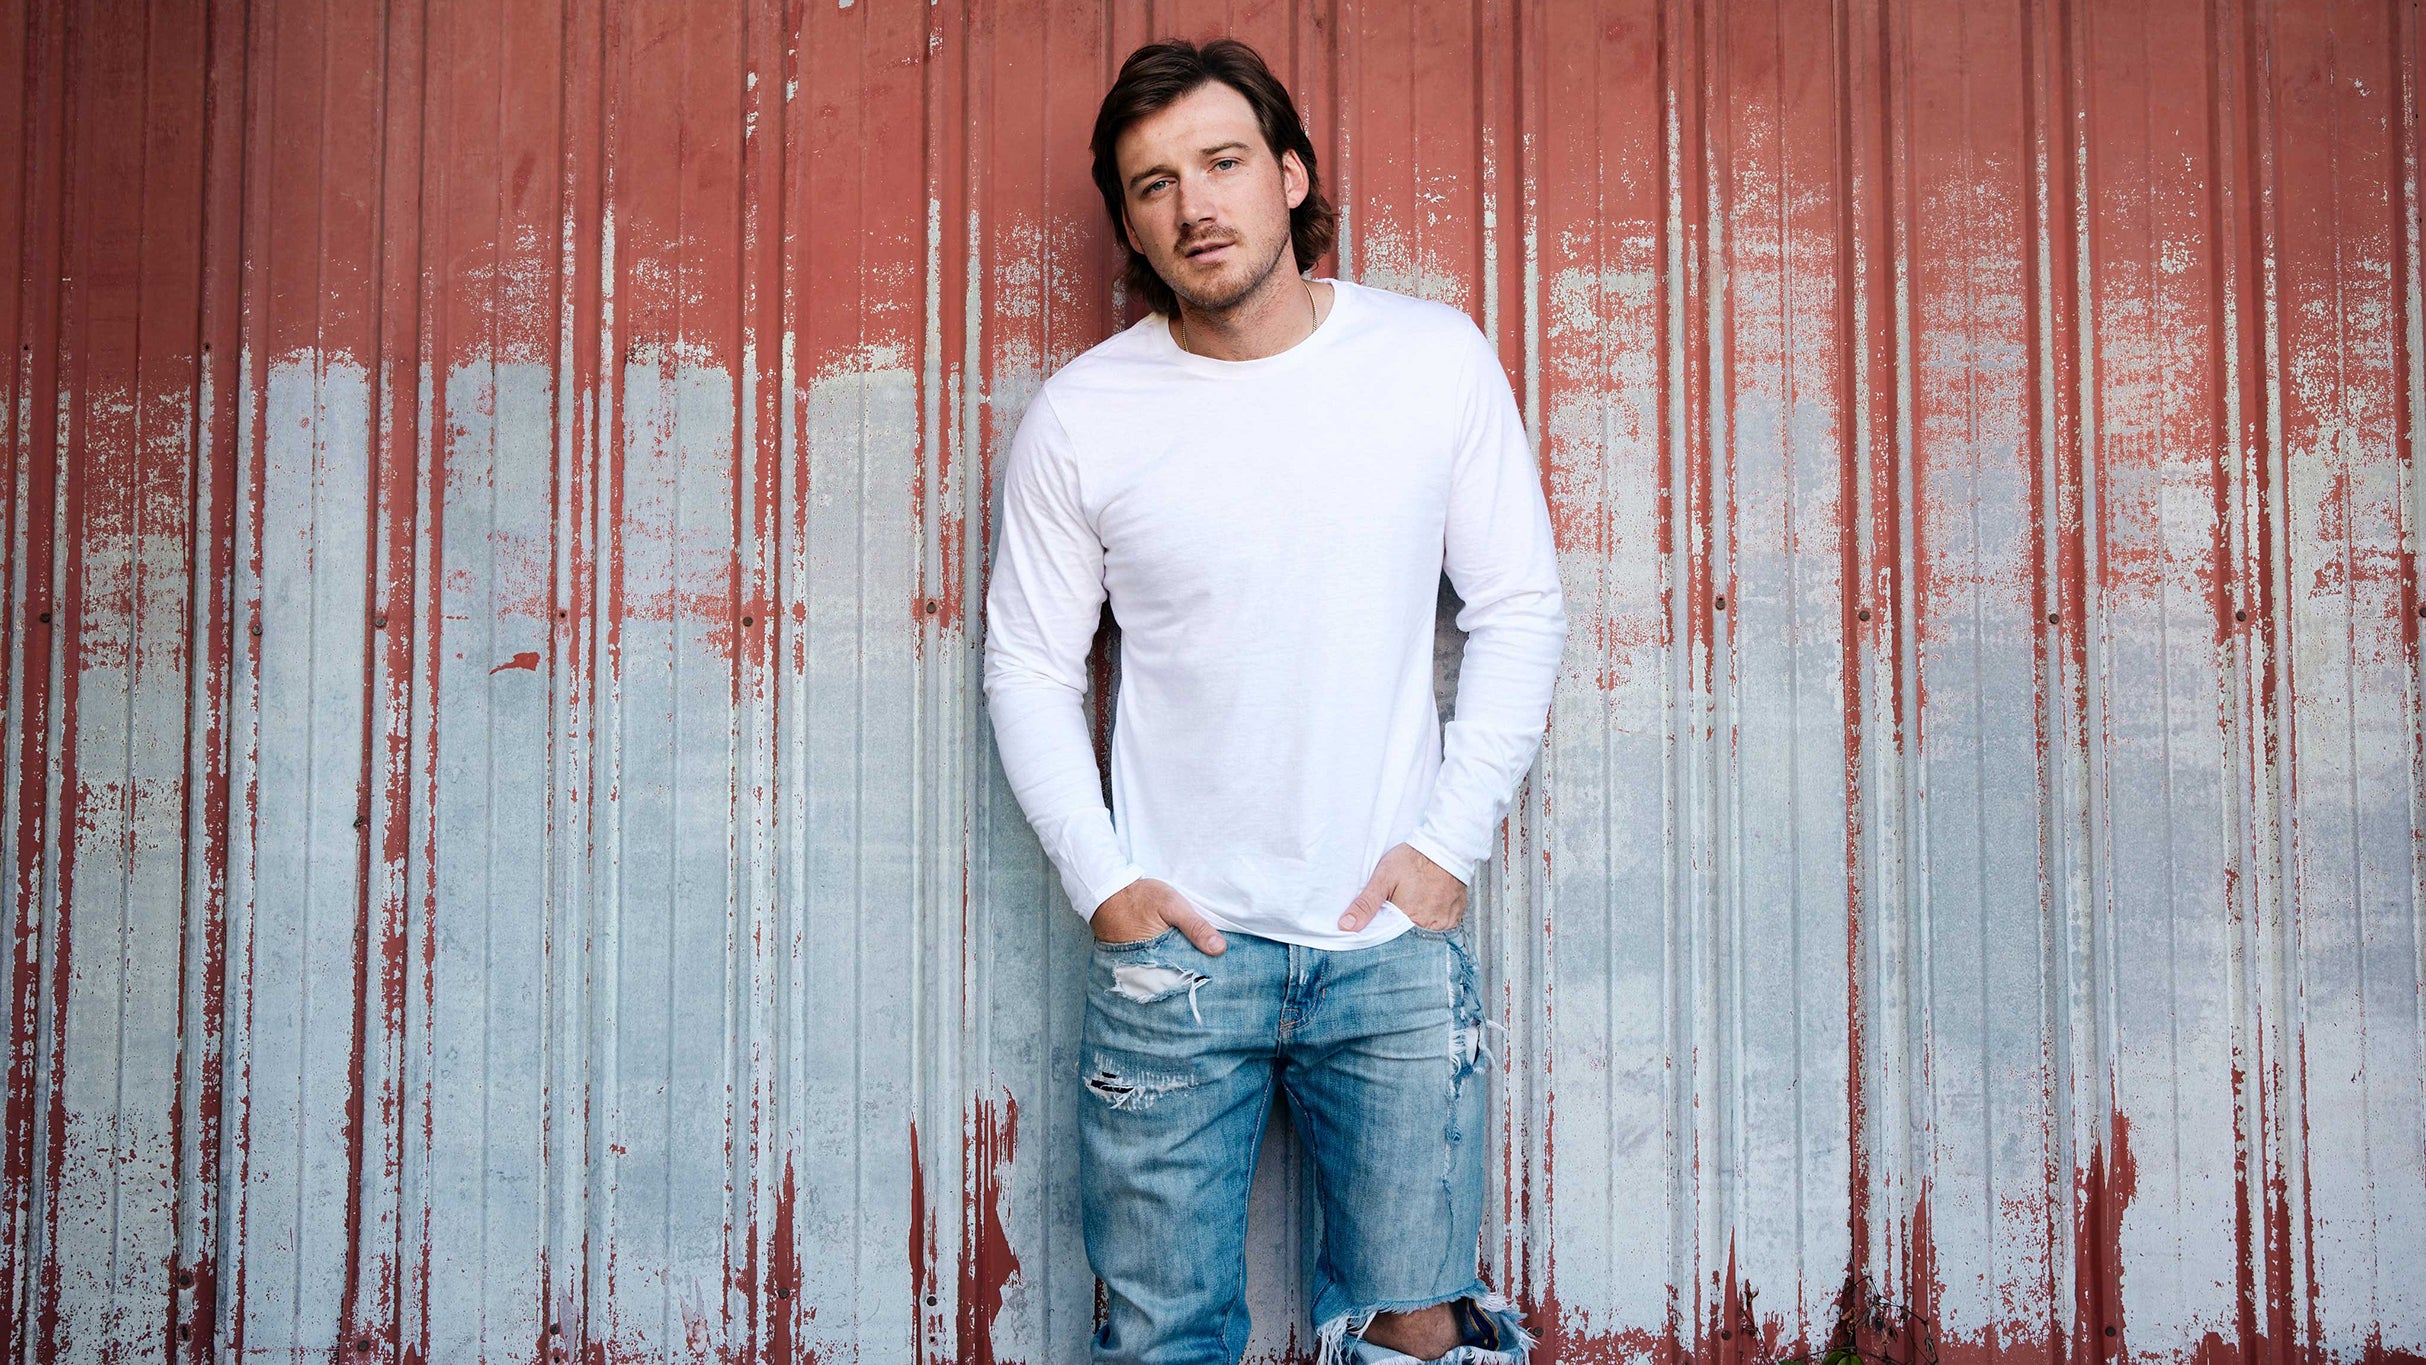 Morgan Wallen: One Night At A Time World Tour in Washington promo photo for Nationals Fan Club presale offer code